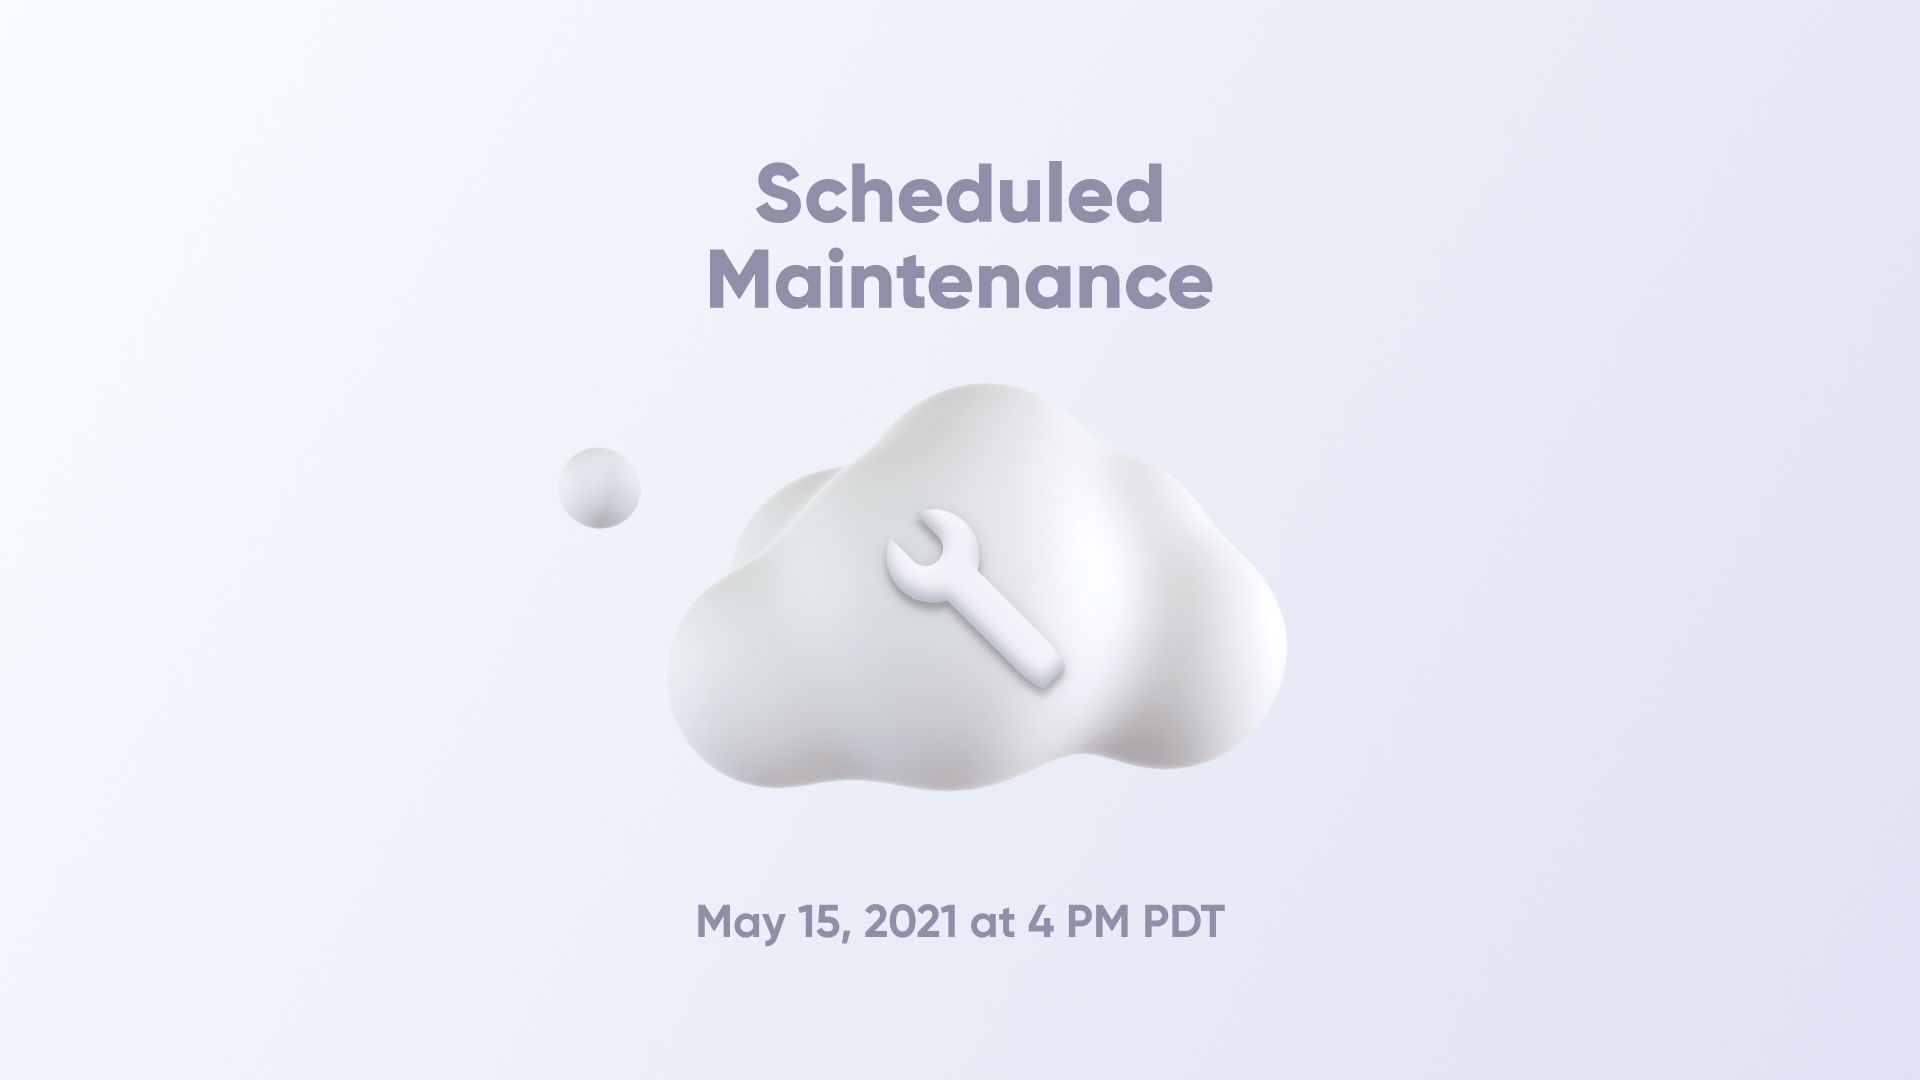 ProtoPie scheduled maintenance on May 15, 2021 thumbnail